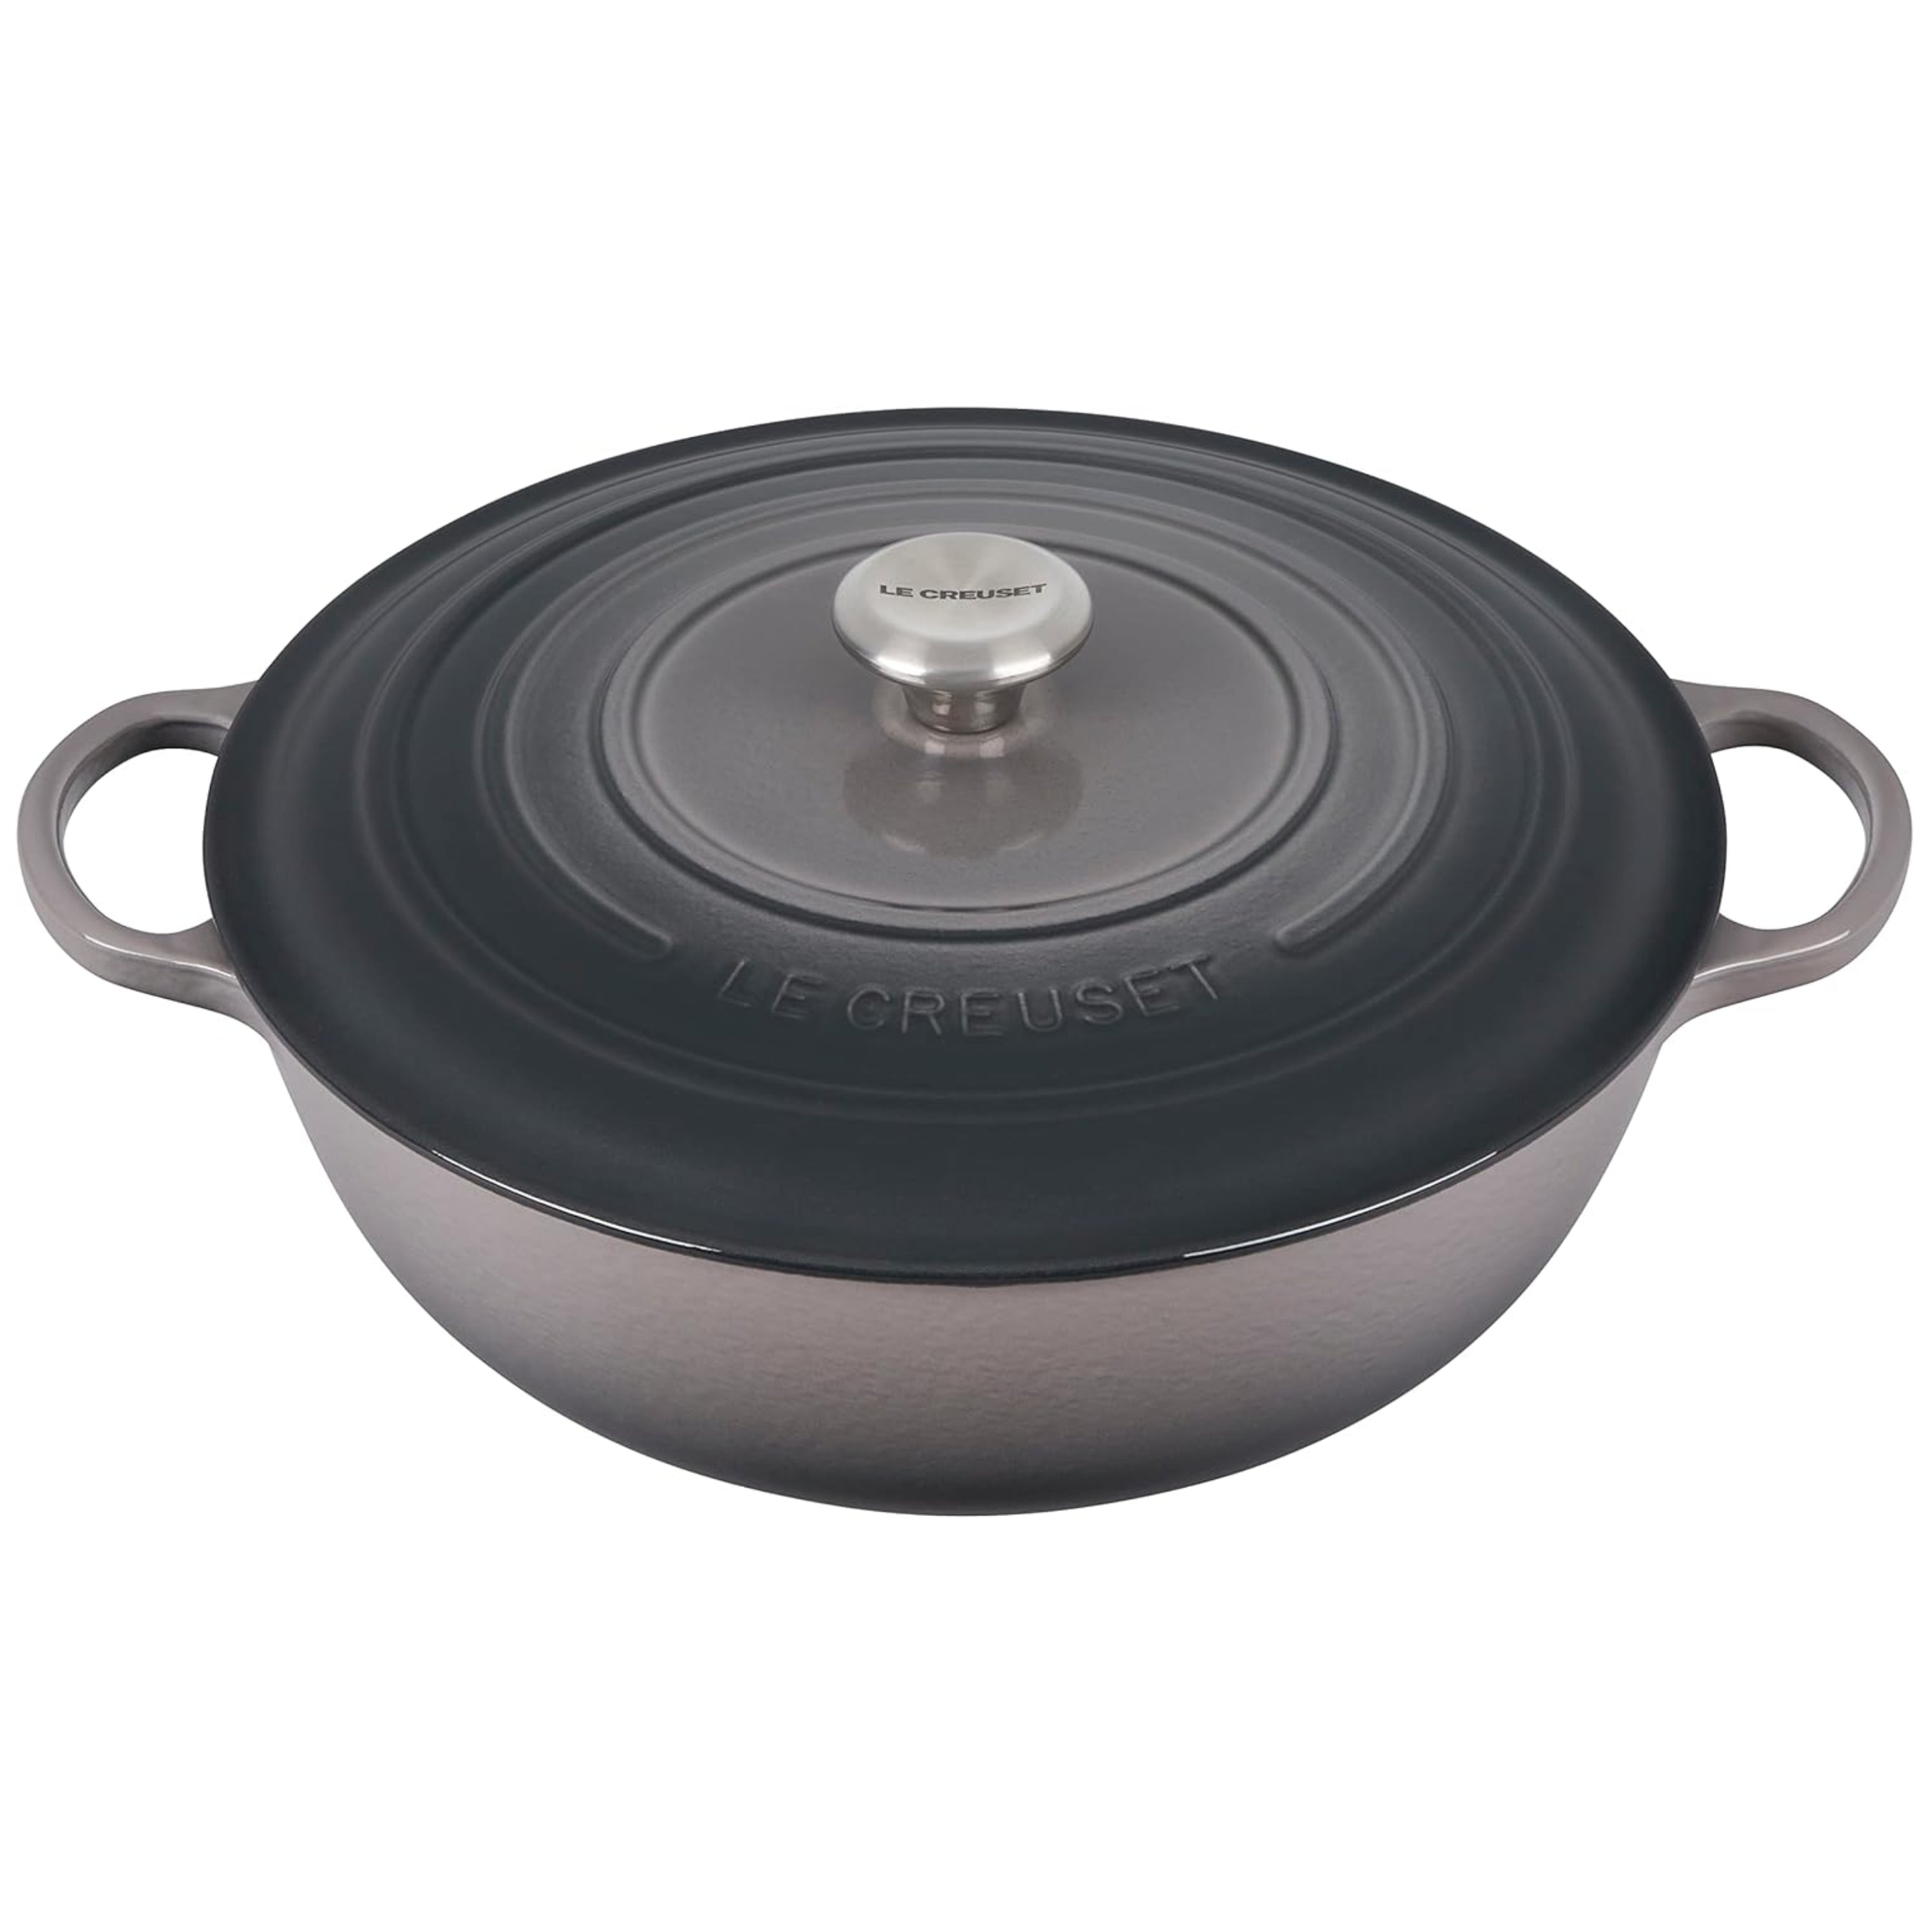 Le Creuset SPECIAL Round Cast Iron Signature Chef's Oven – 7.5 QT – Oyster